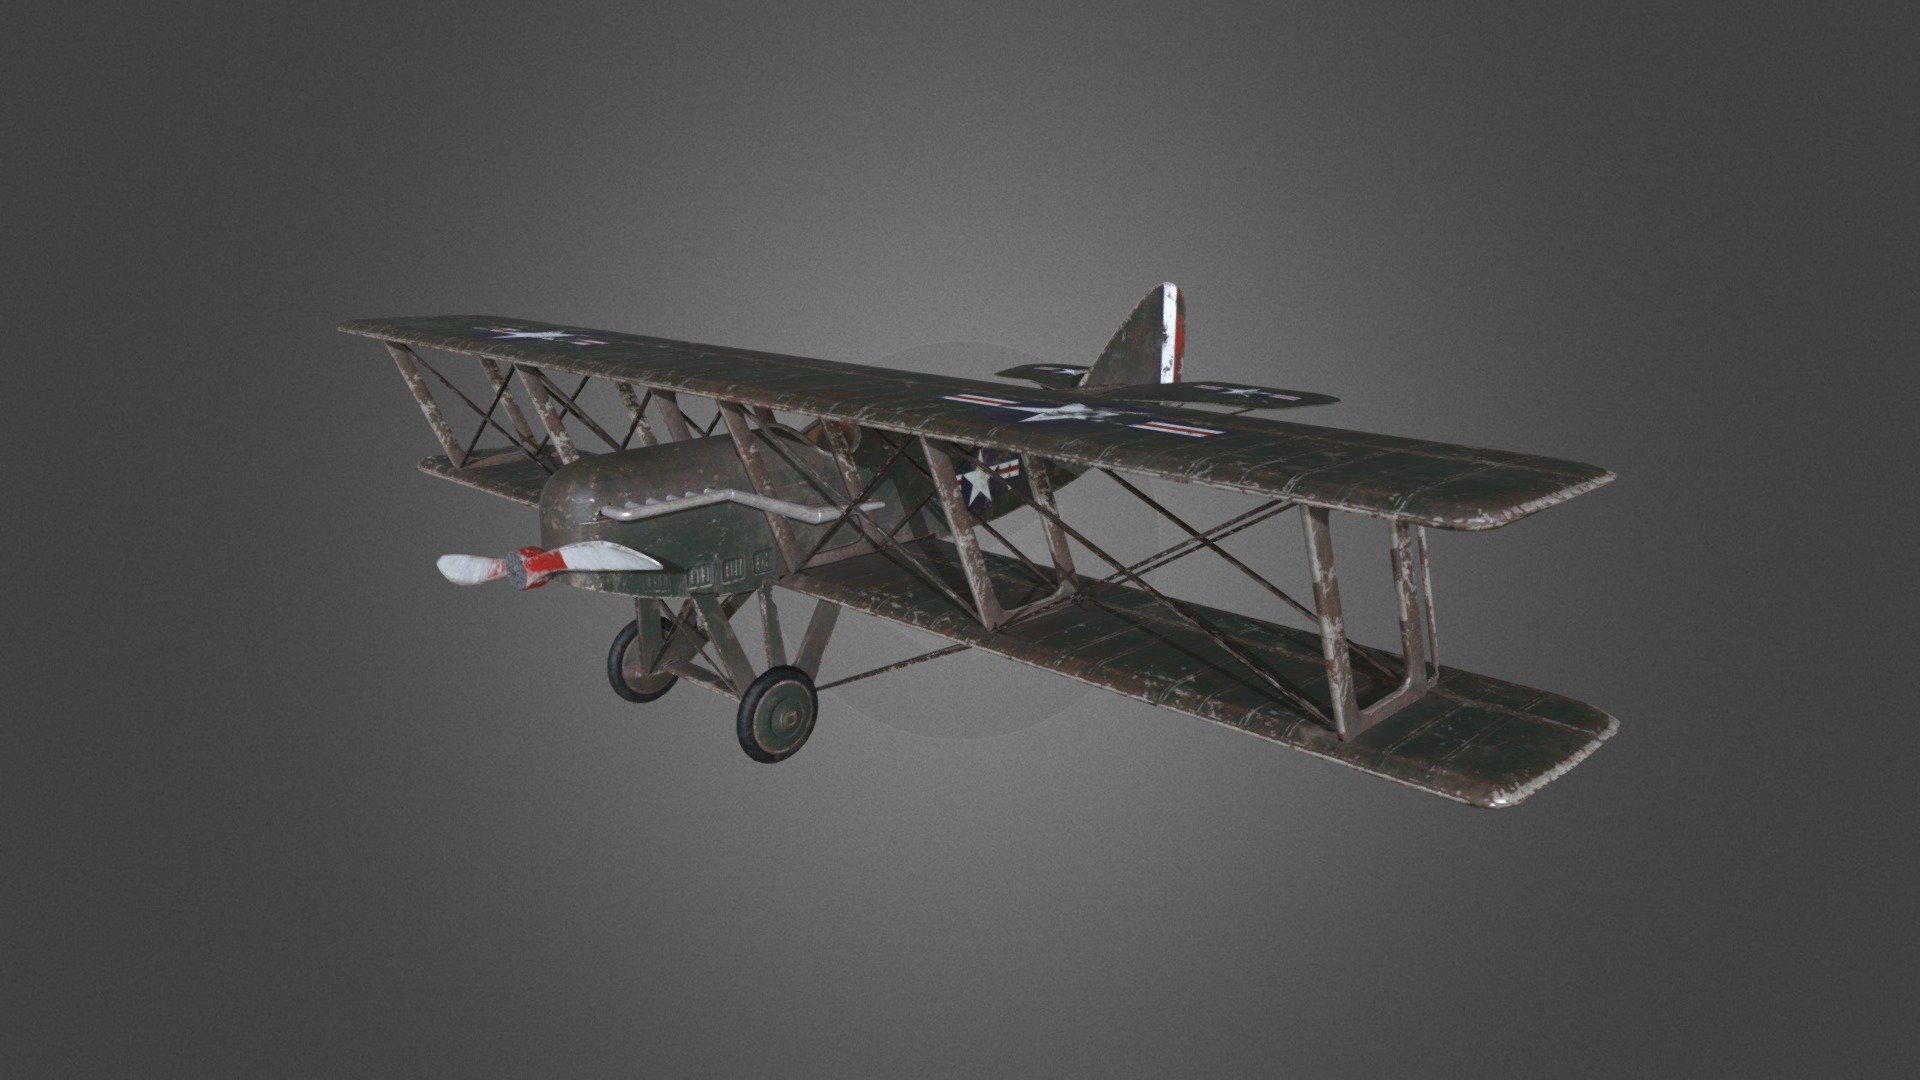 Old WW1 plane. Low poly
texture - 2048x2048
Modelled in 3ds max studio. Textured and baked in Substance painte - Old WW1 plane - low poly - 3D model by RafalTlalka 3d model